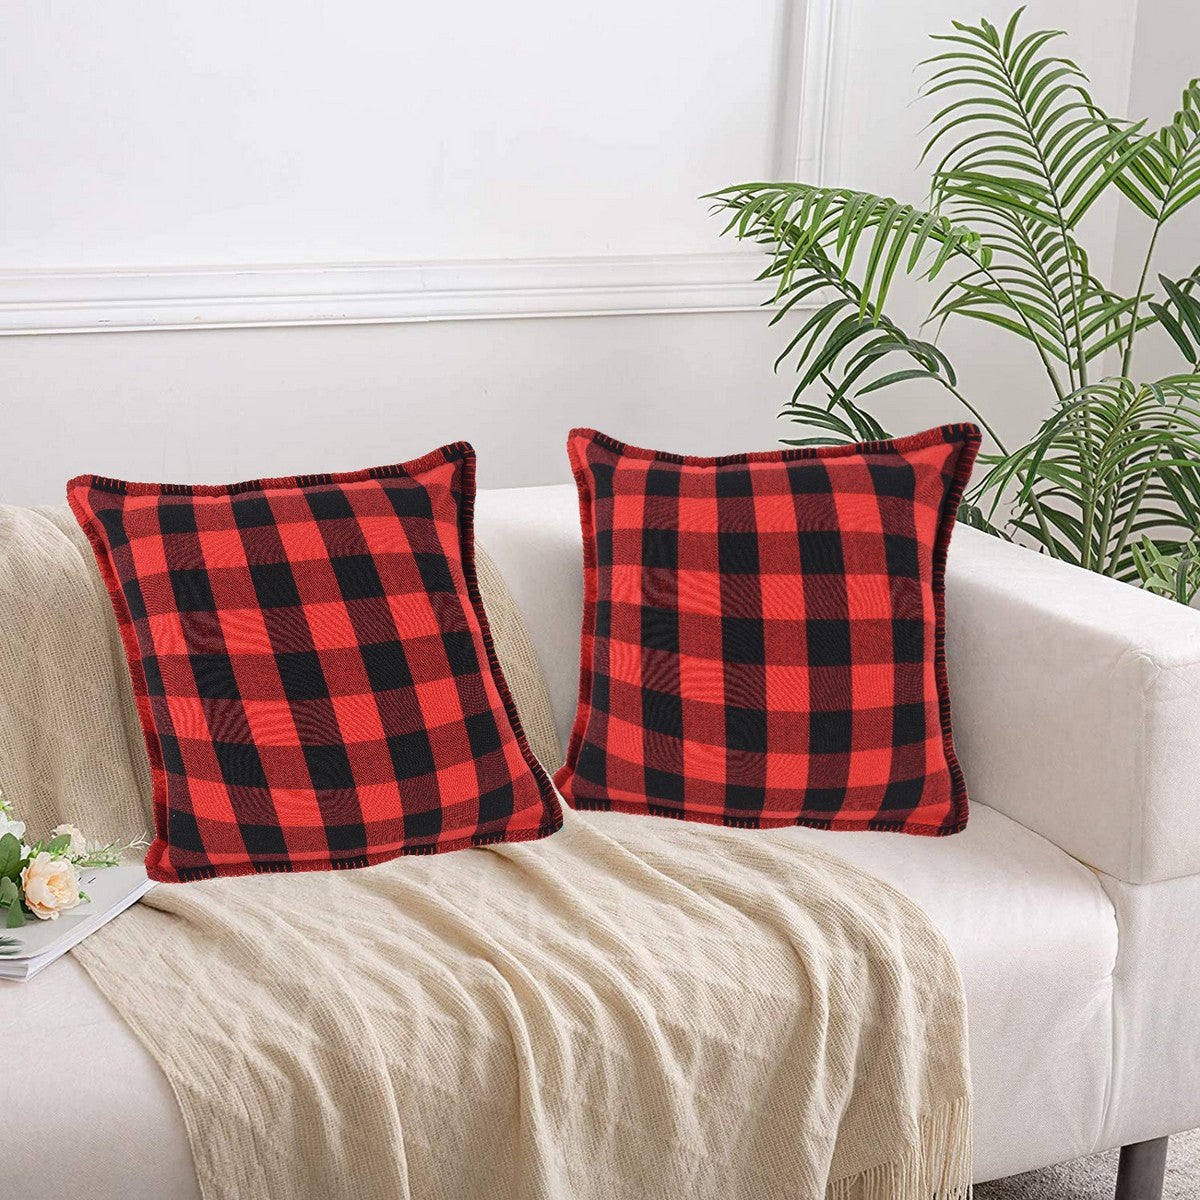 Lushomes Square Cushion Cover with Blanket Stitch, Cotton Sofa Pillow Cover Set of 2, 20x20 Inch, Big Checks, Red and Black Checks, Pillow Cushions Covers (Pack of 2, 50x50 Cms)